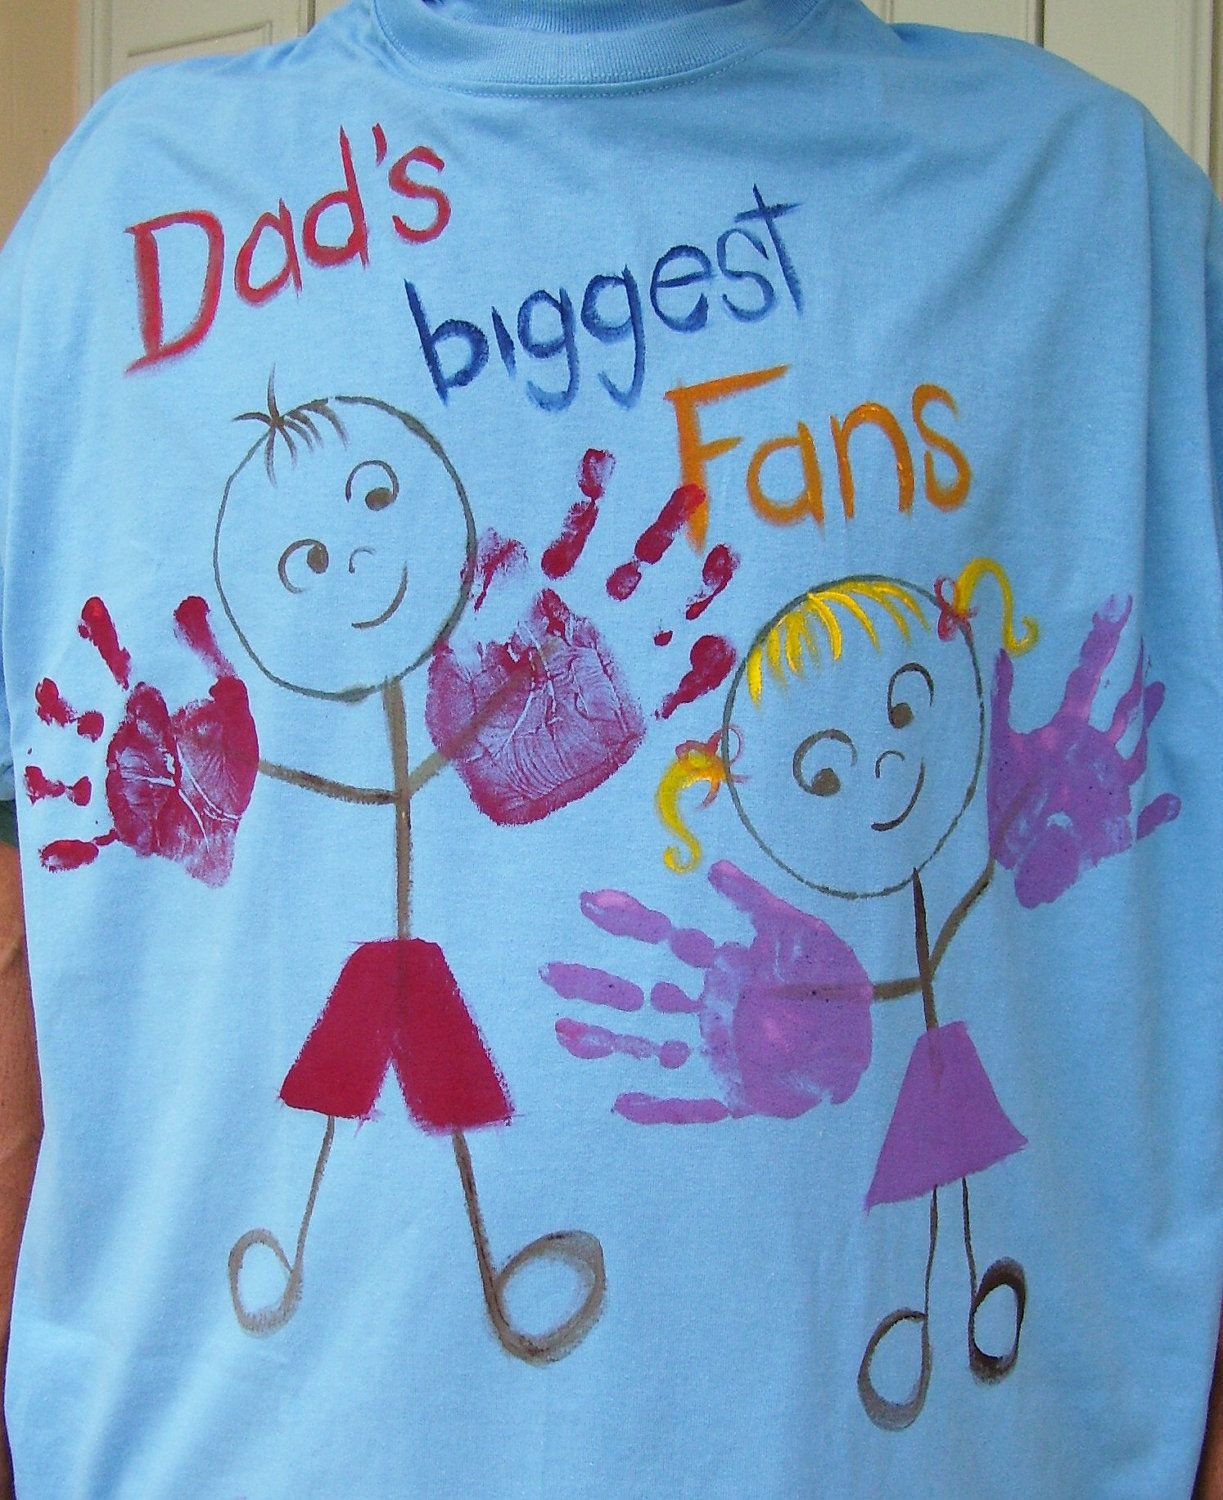 DIY Birthday Shirts For Toddlers
 Dad s T Shirt Biggest Fans Hand Painted CUSTOM ORDER ONLY